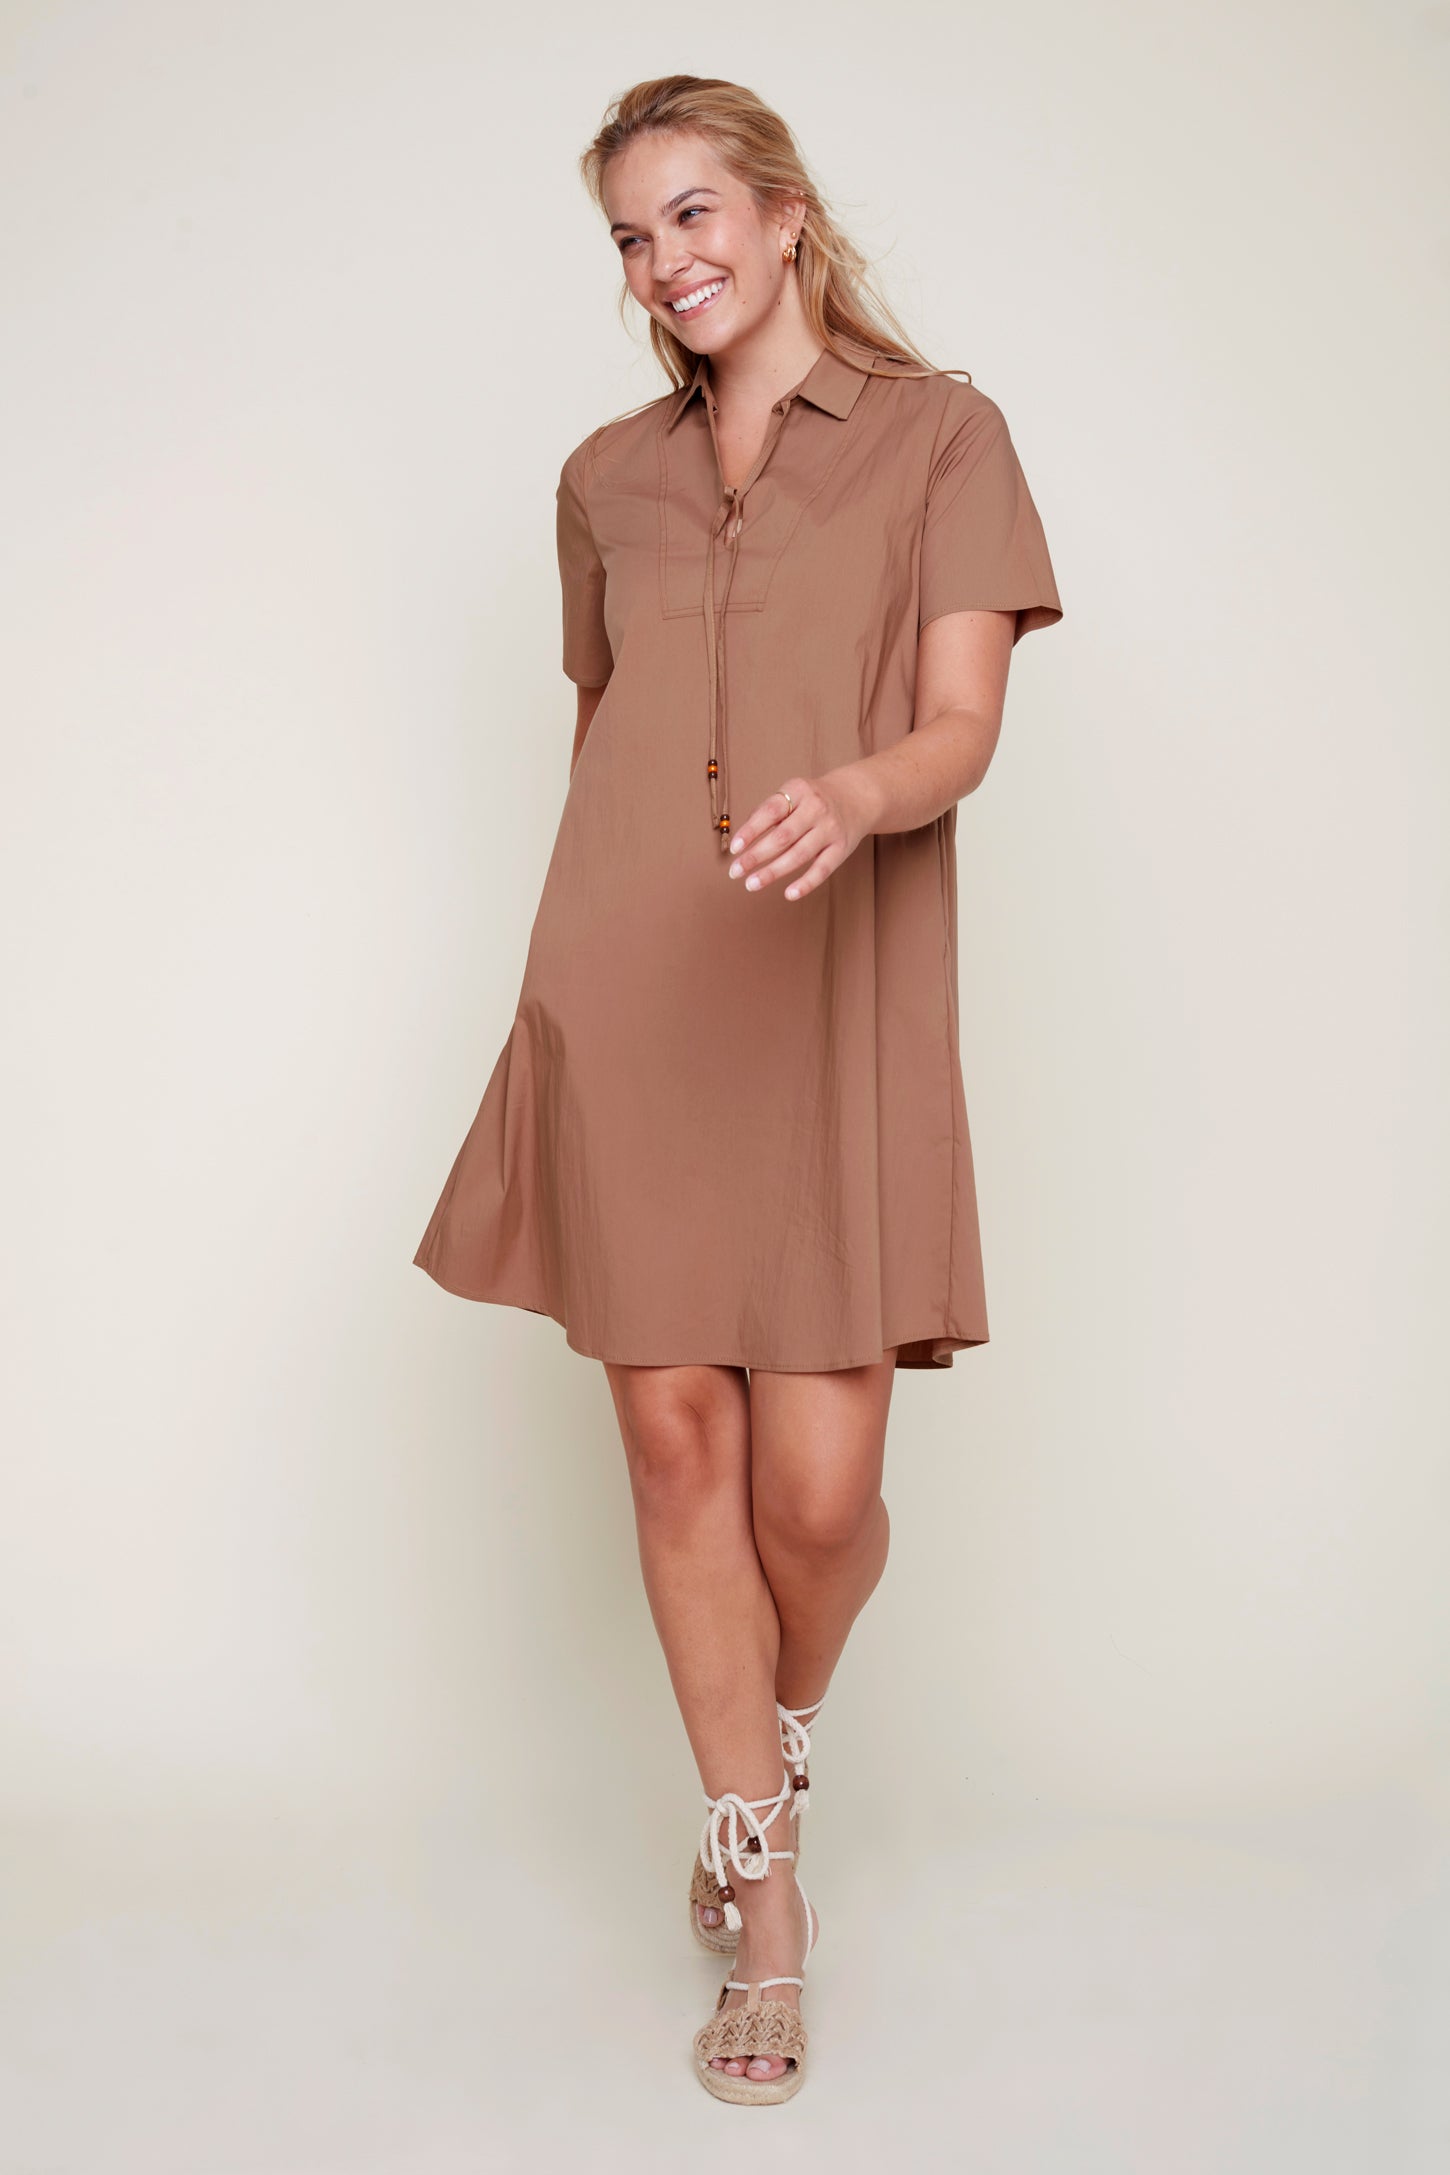 Woven Dress With Pockets R4330-990